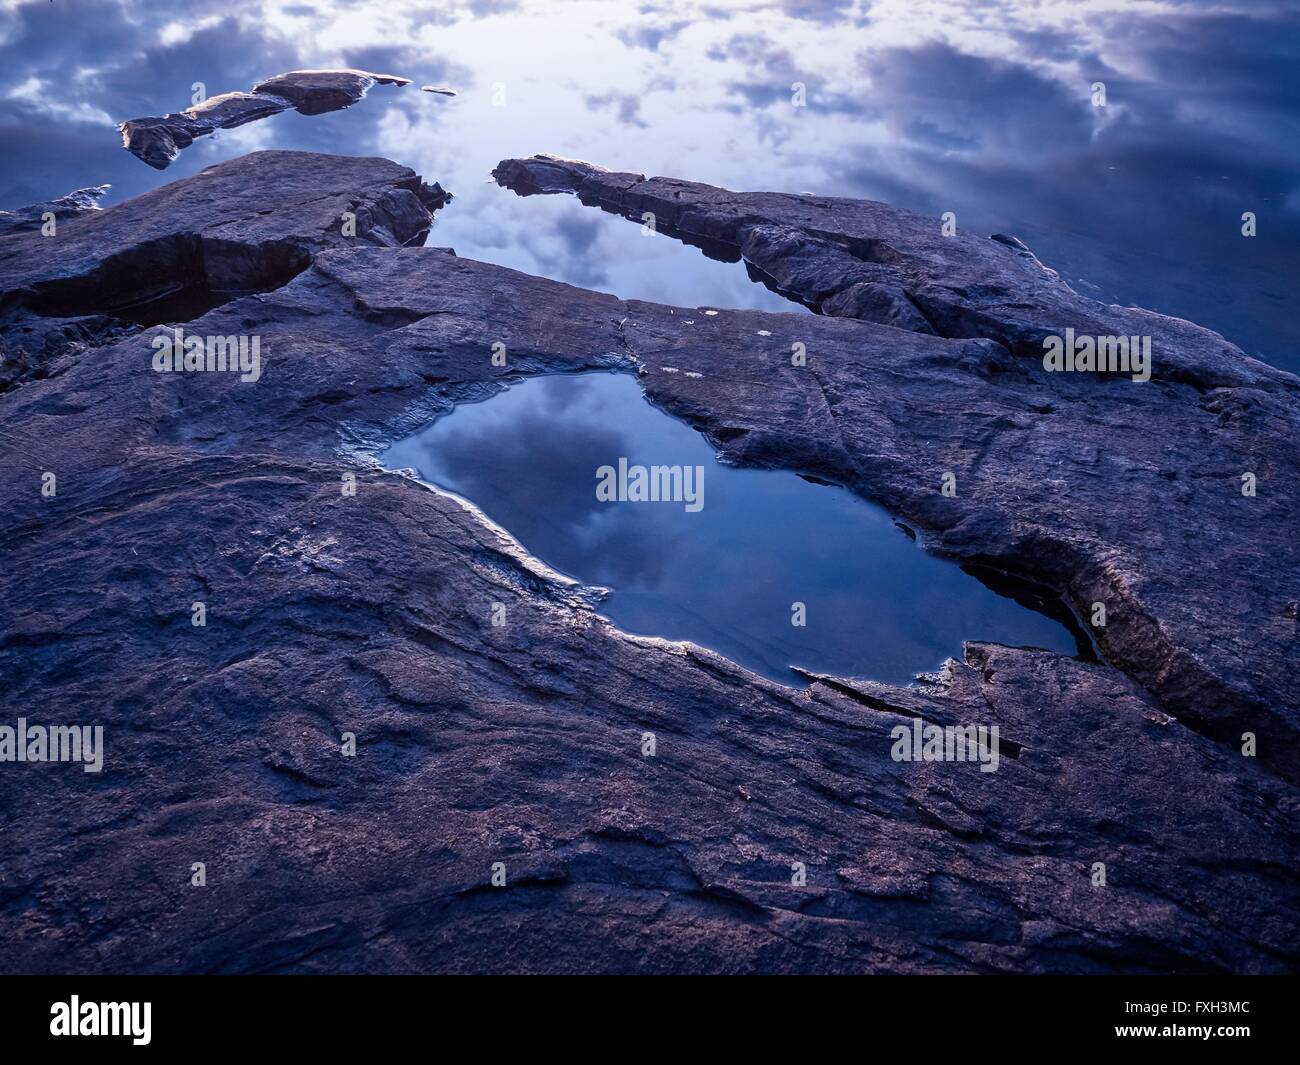 Reflection of cloudy blue sky between the rocks on the shore. Stock Photo